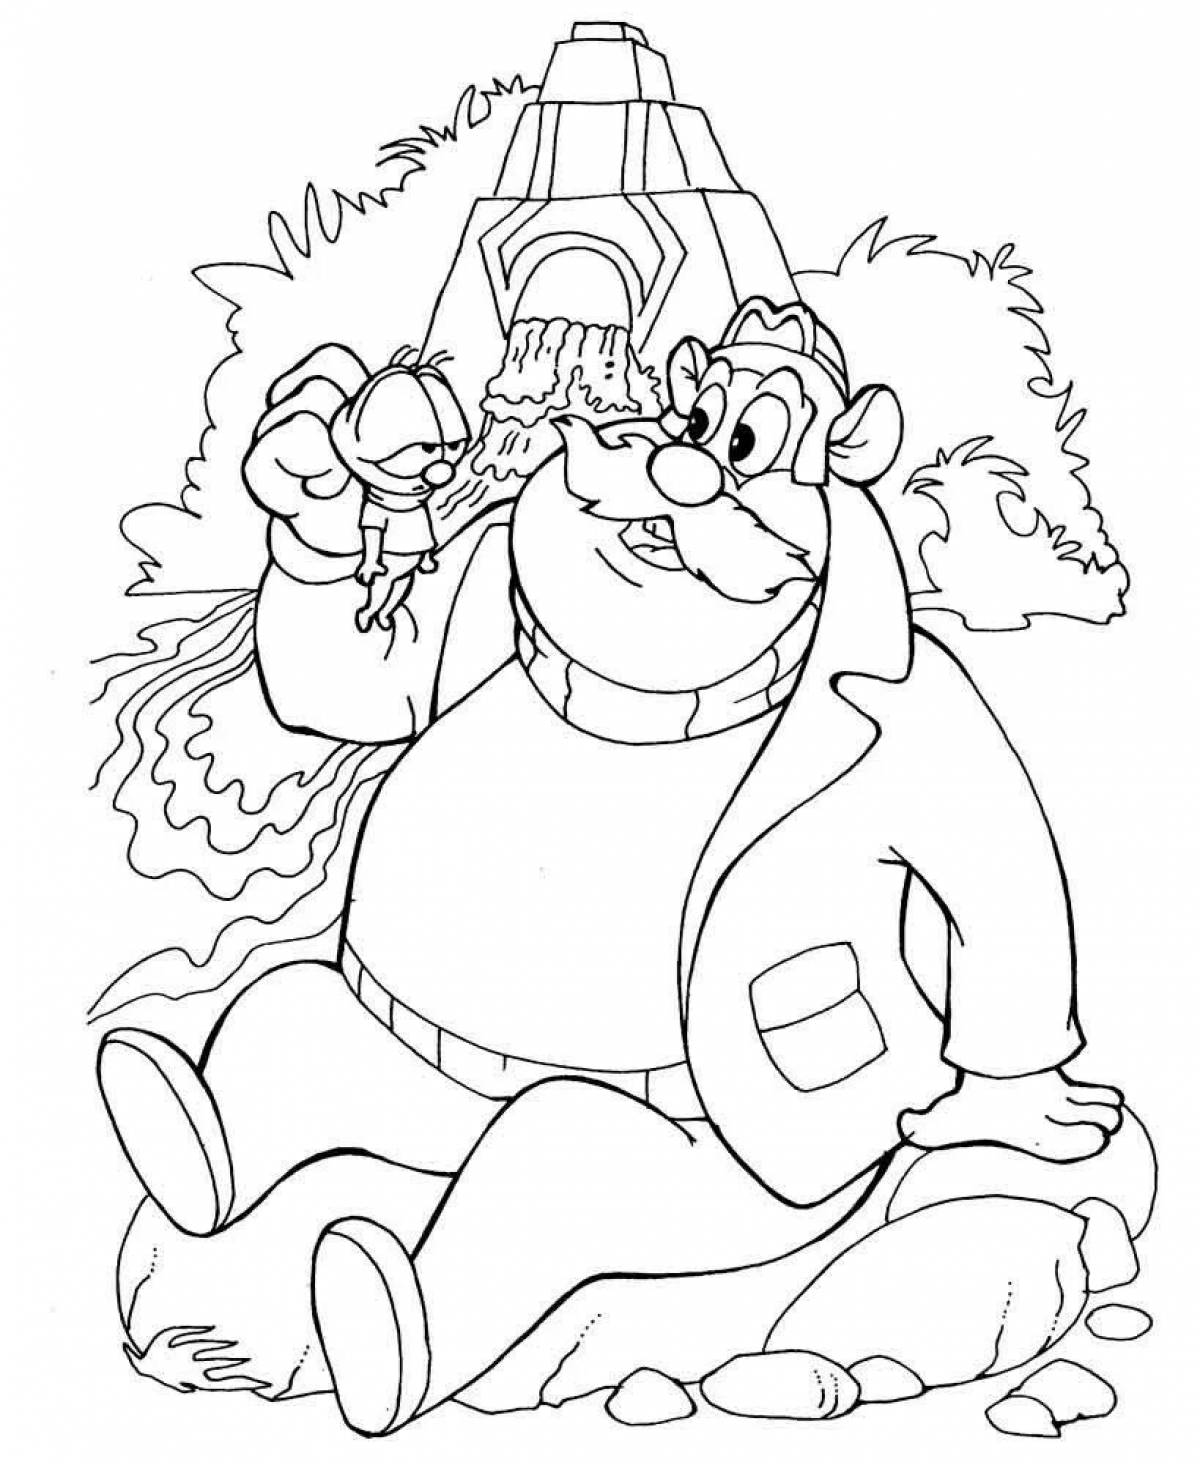 Adorable chip and dale coloring pages for kids